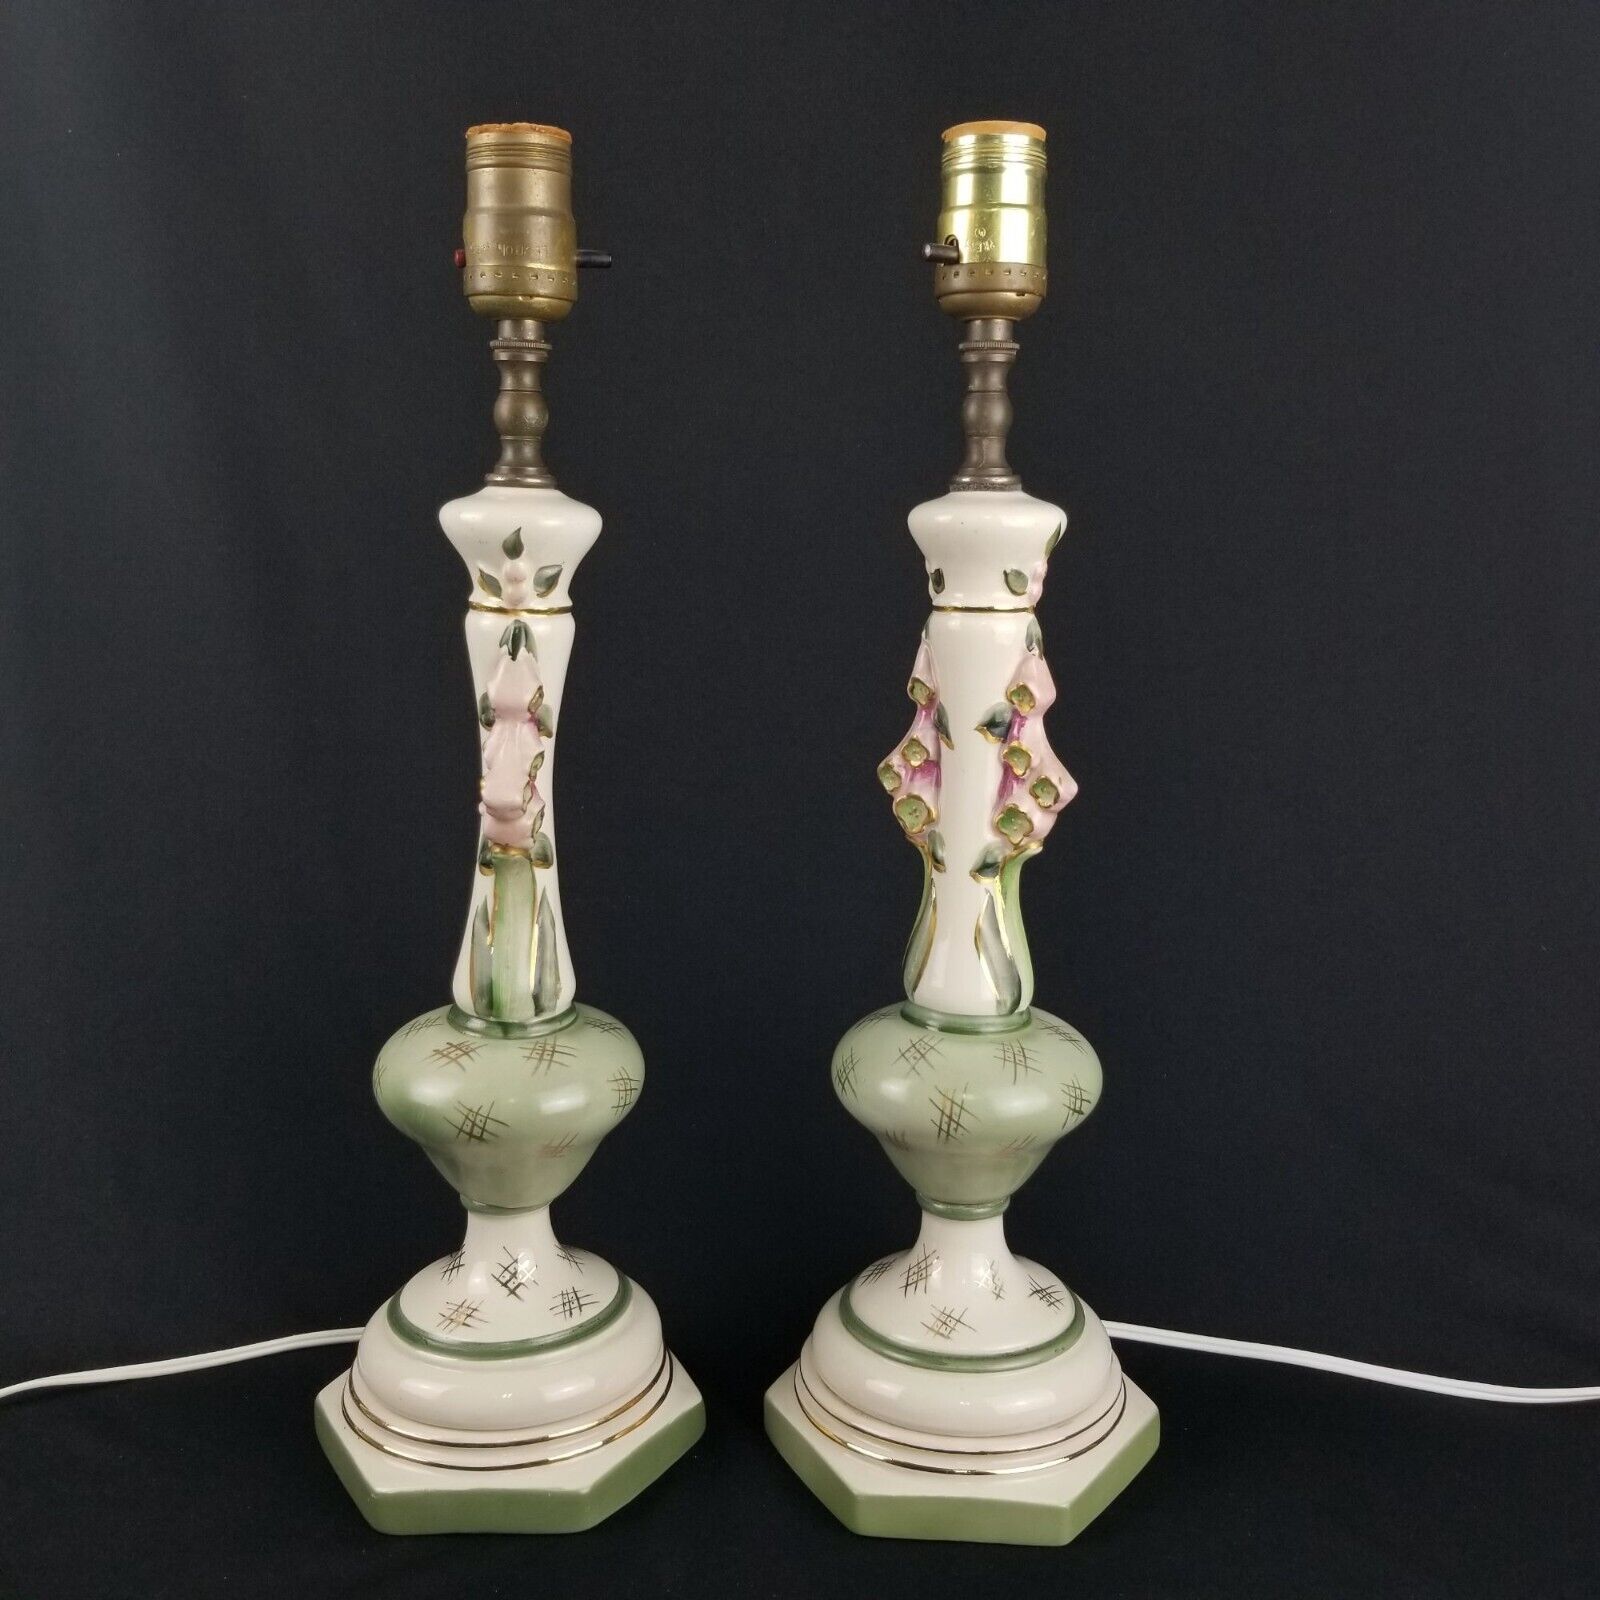 Pair of Lamps Painted Floral Crooked Lamps Needs Repaired Project Lamp Piece